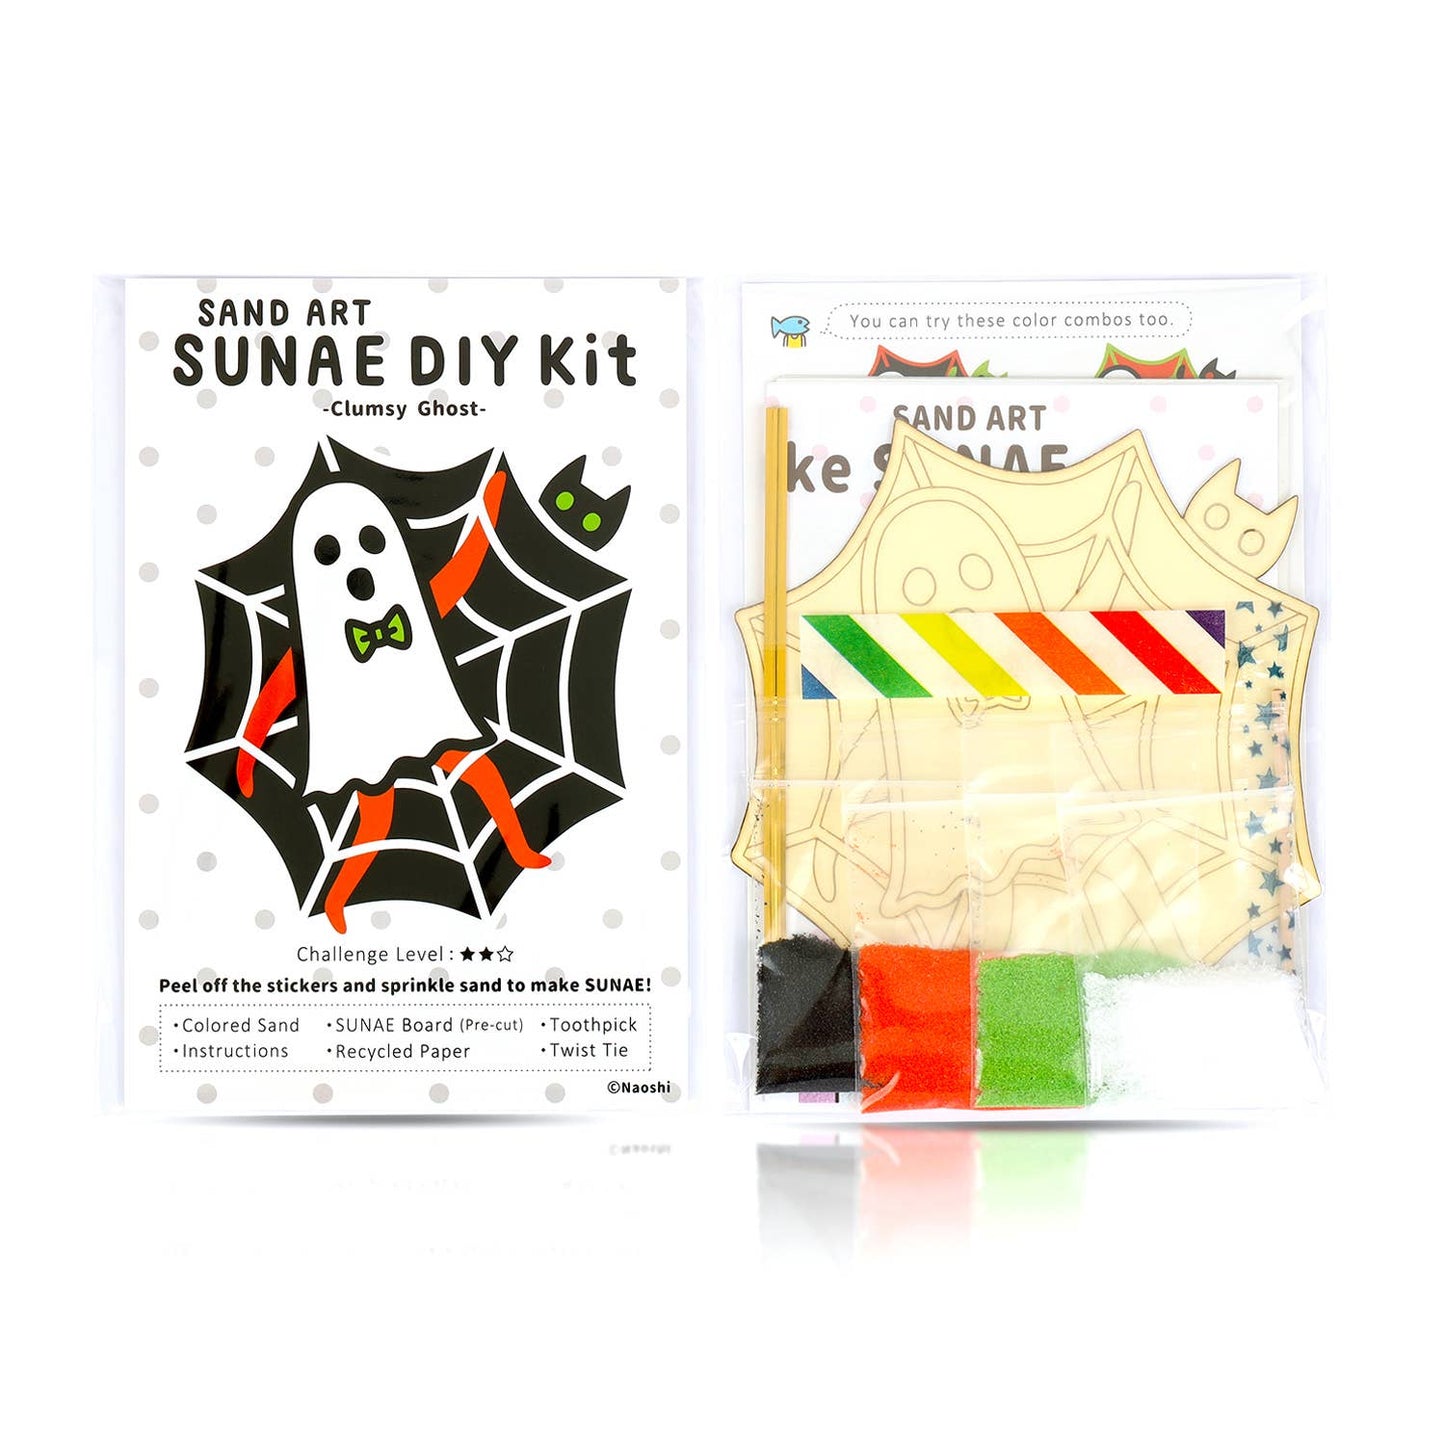 Clumsy Ghost Sand Art Kit